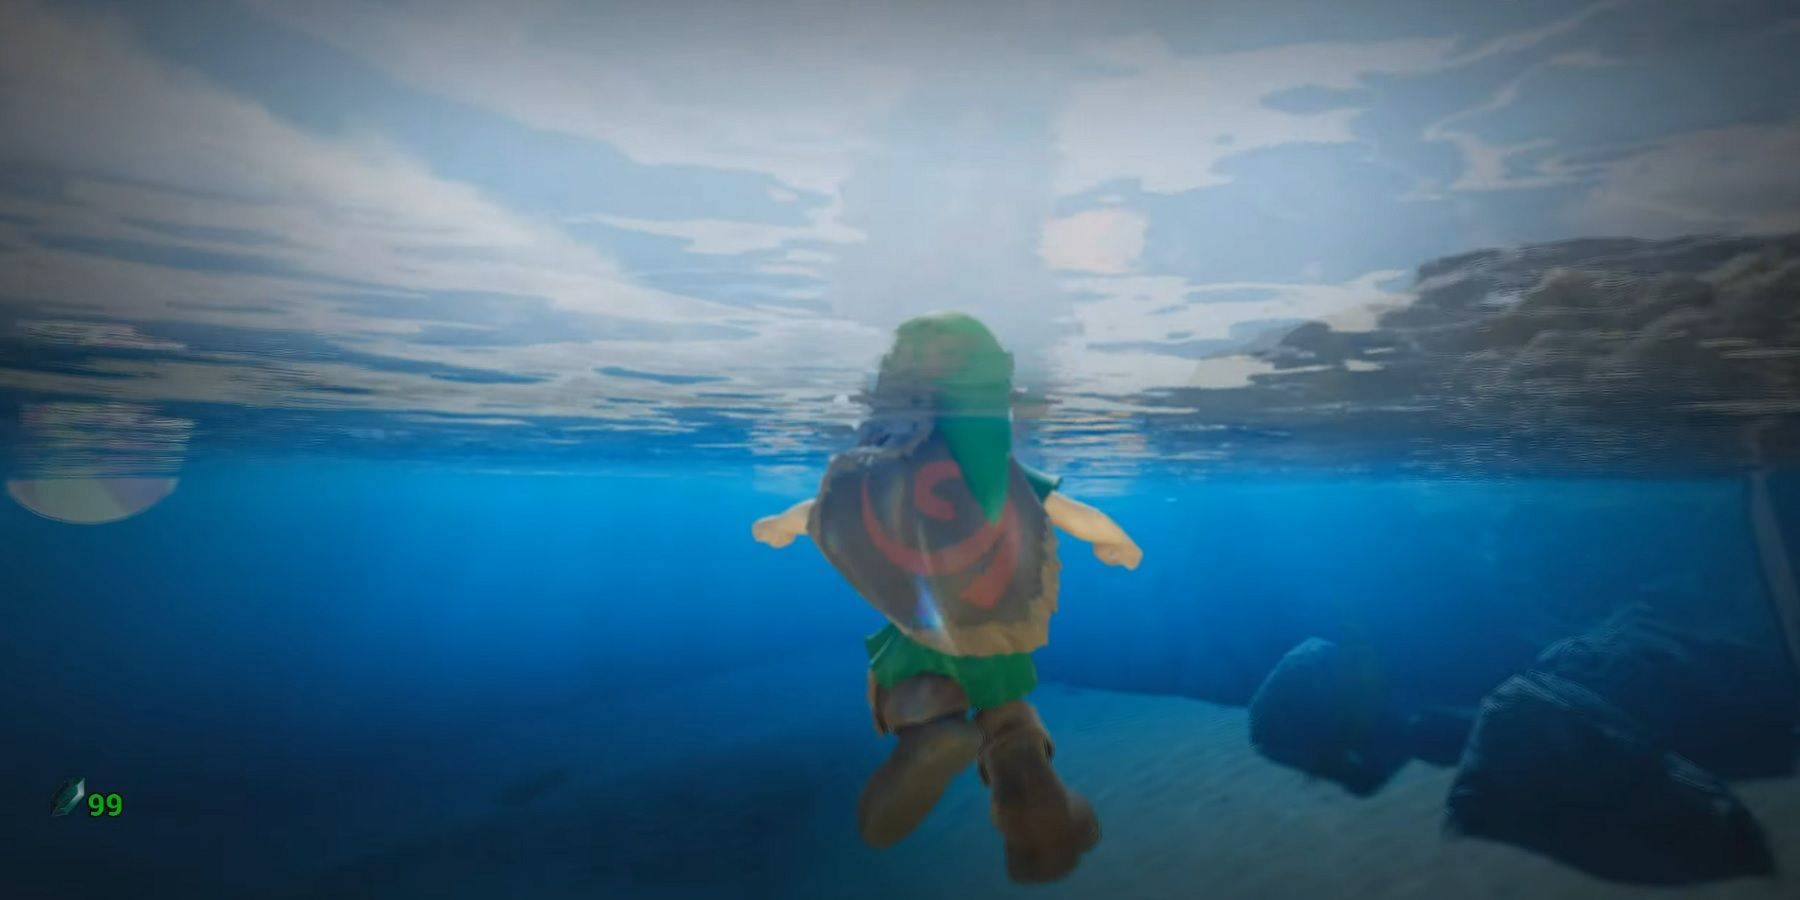 Unreal Engine 4 Fan Remake of Ocarina of Time Now Supports Co-Op Mode